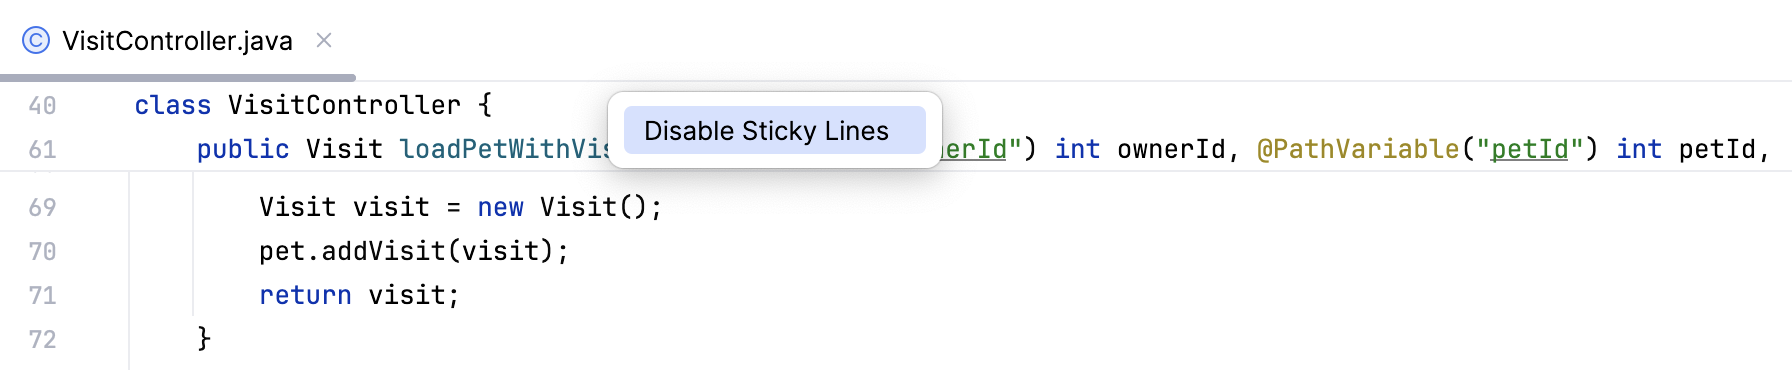 Disable sticky lines